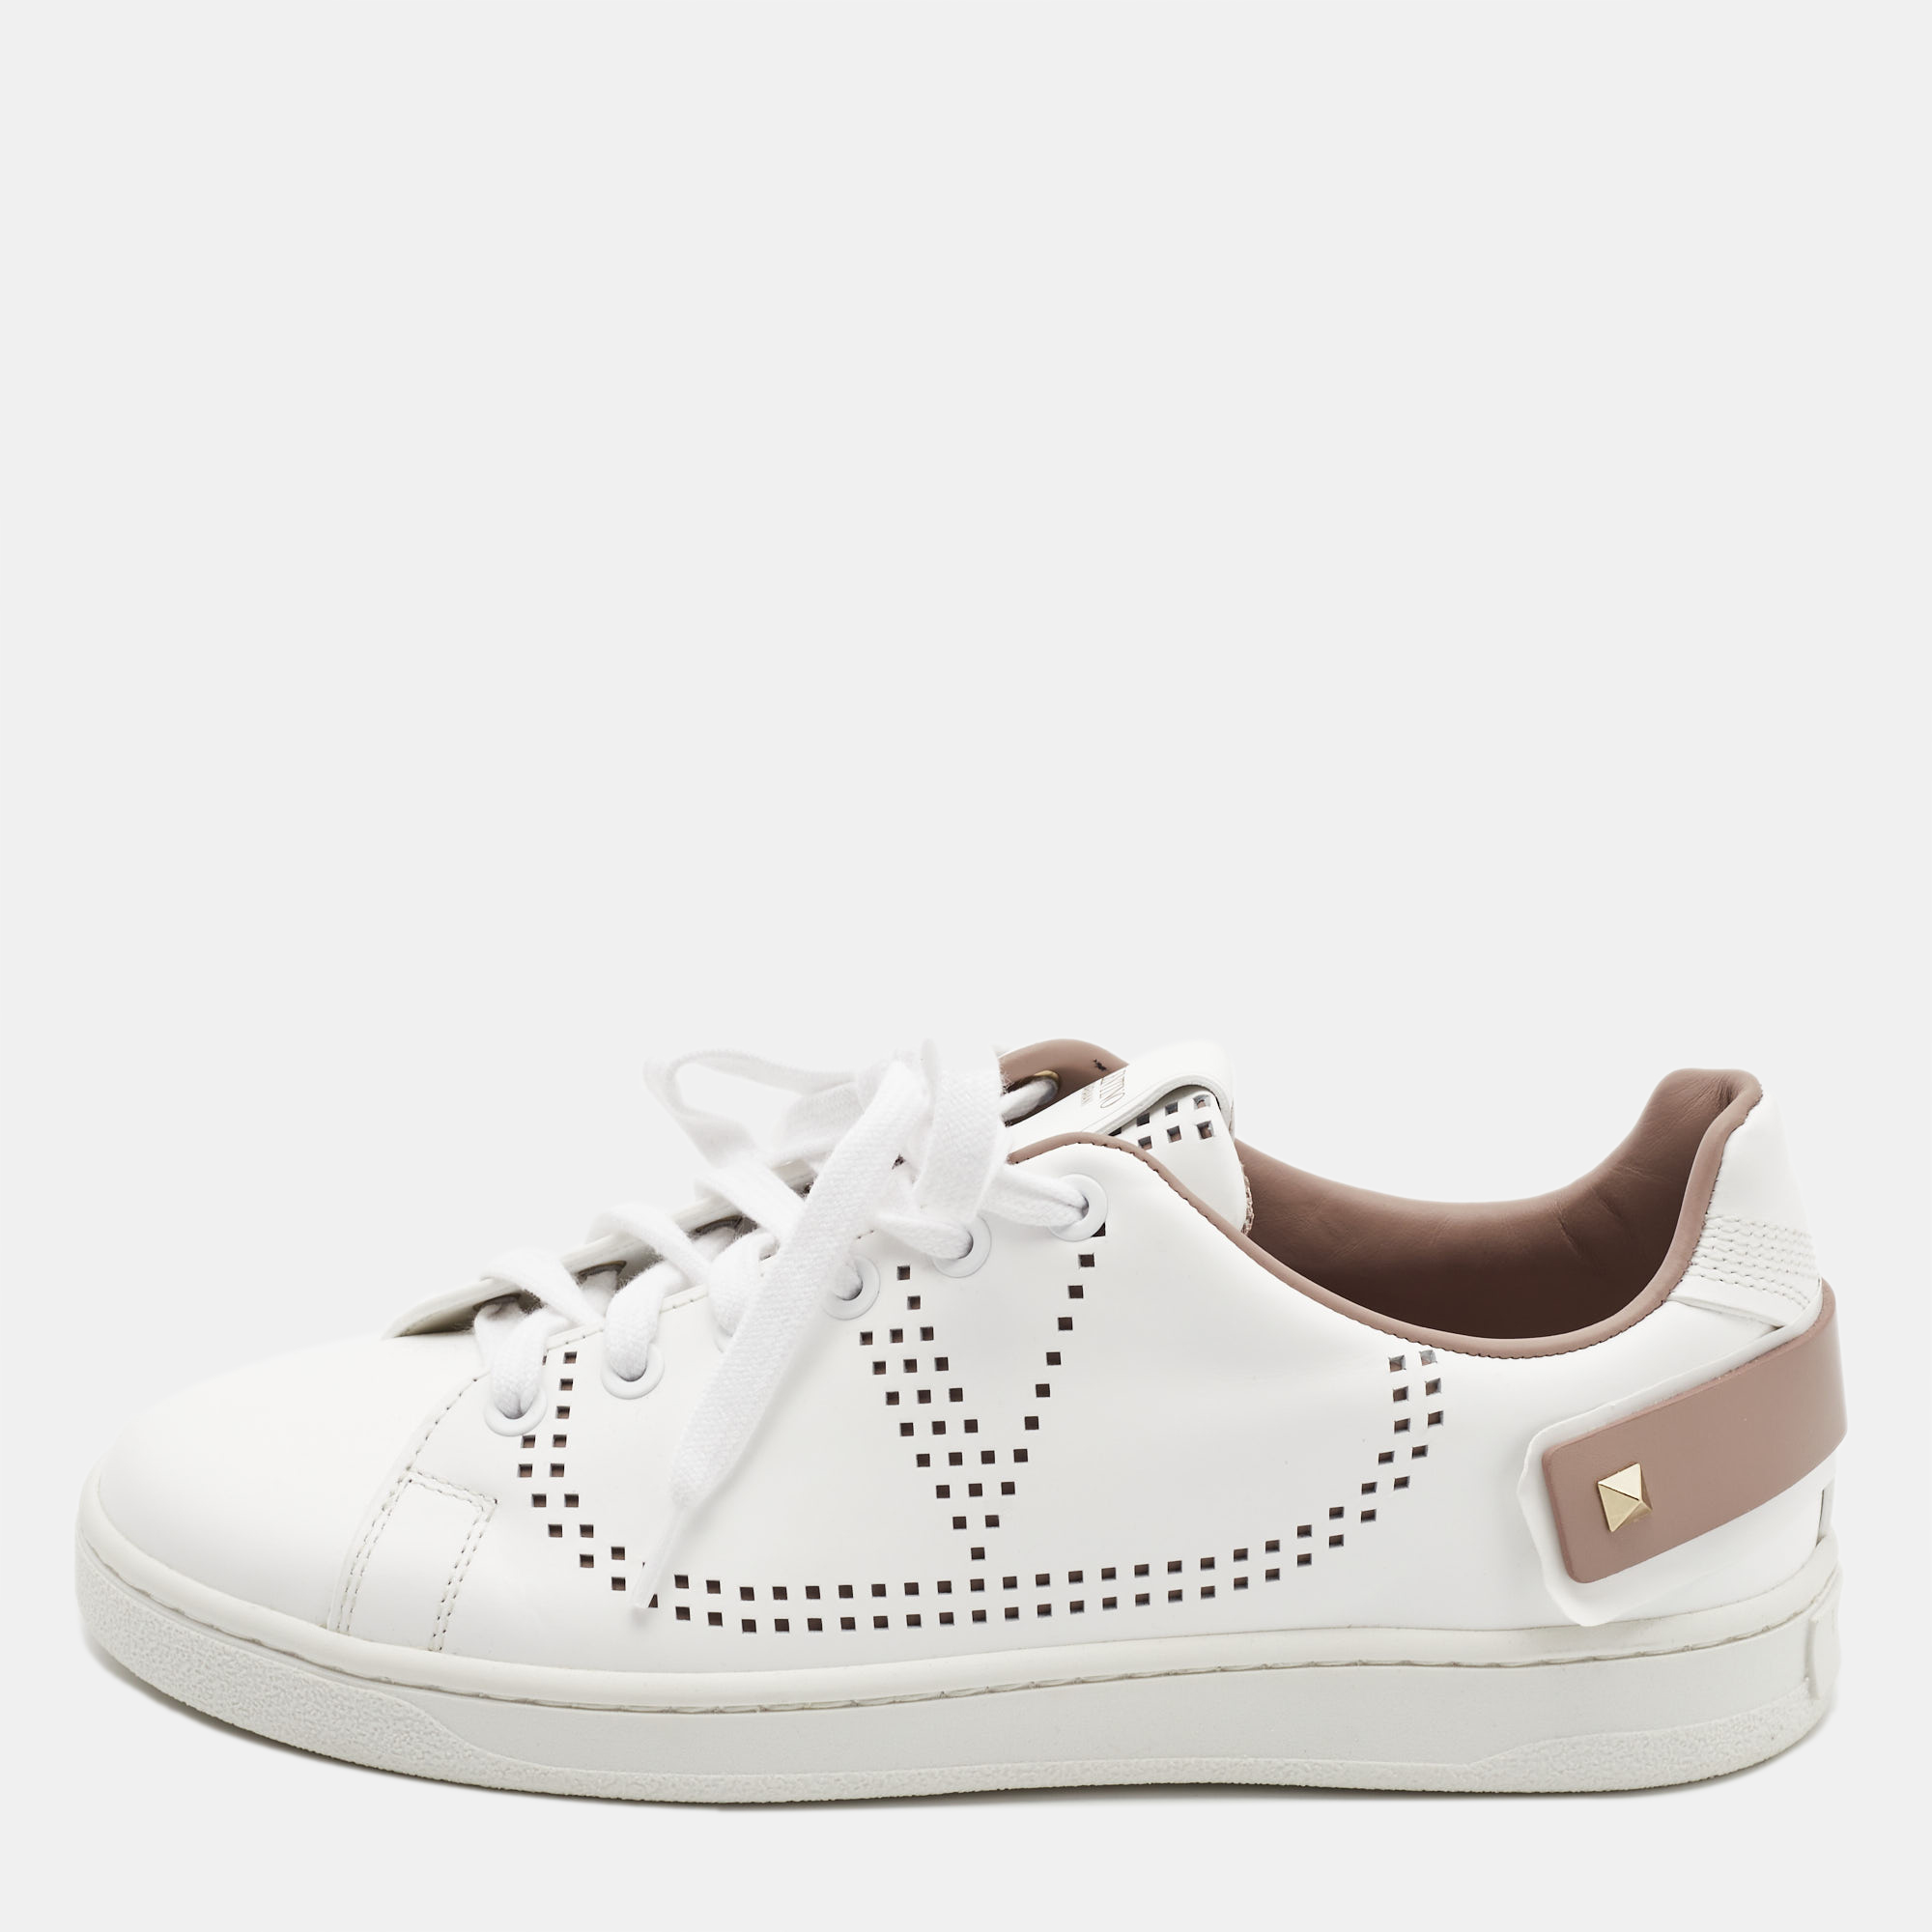 Valentino white/beige leather perforated v backnet sneakers size 37